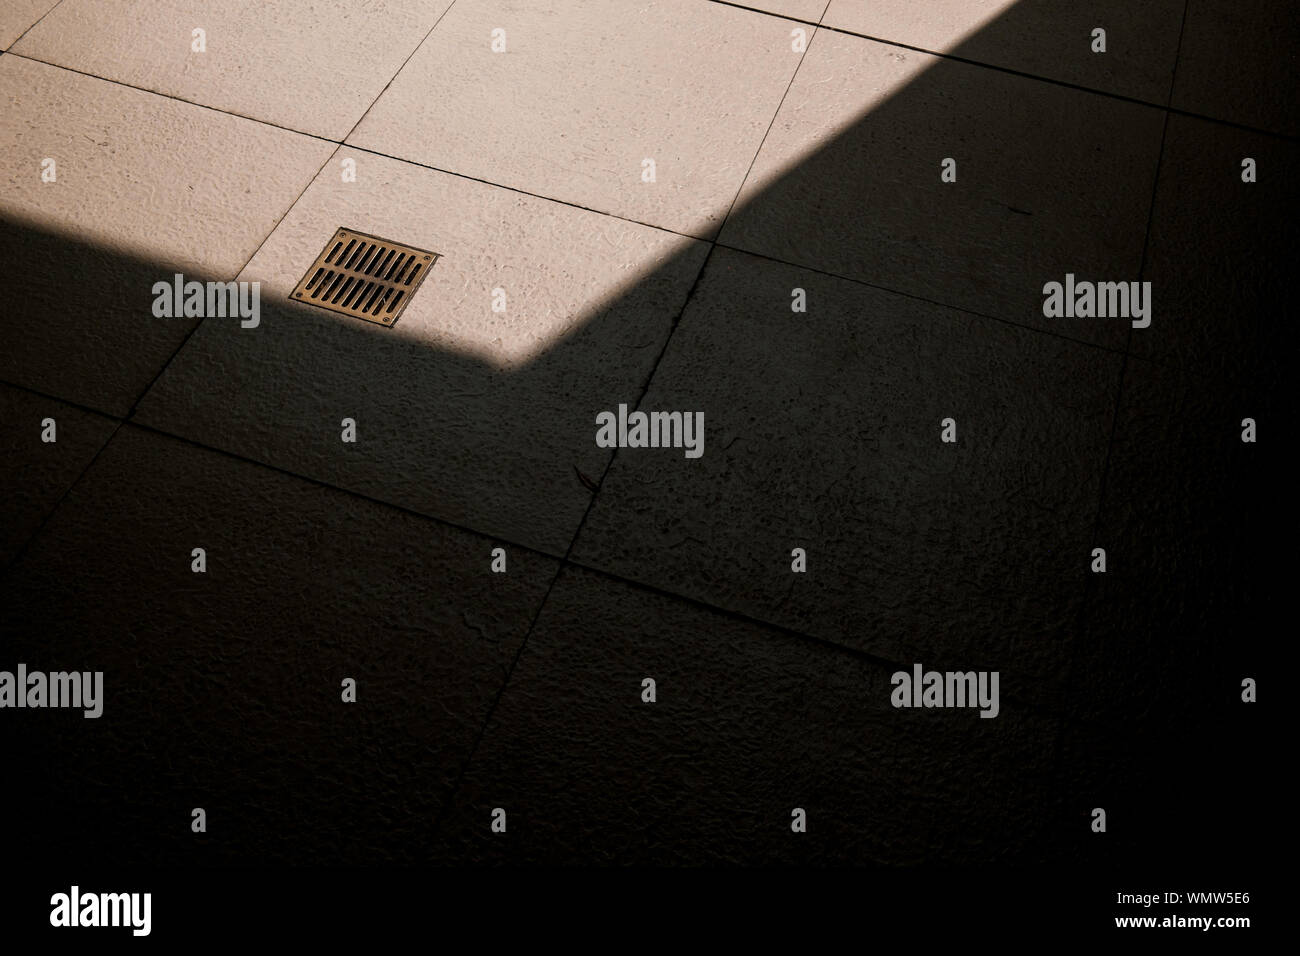 High Angle View Of Metal Grid Cover On Manhole Over Tiled Floor Stock Photo